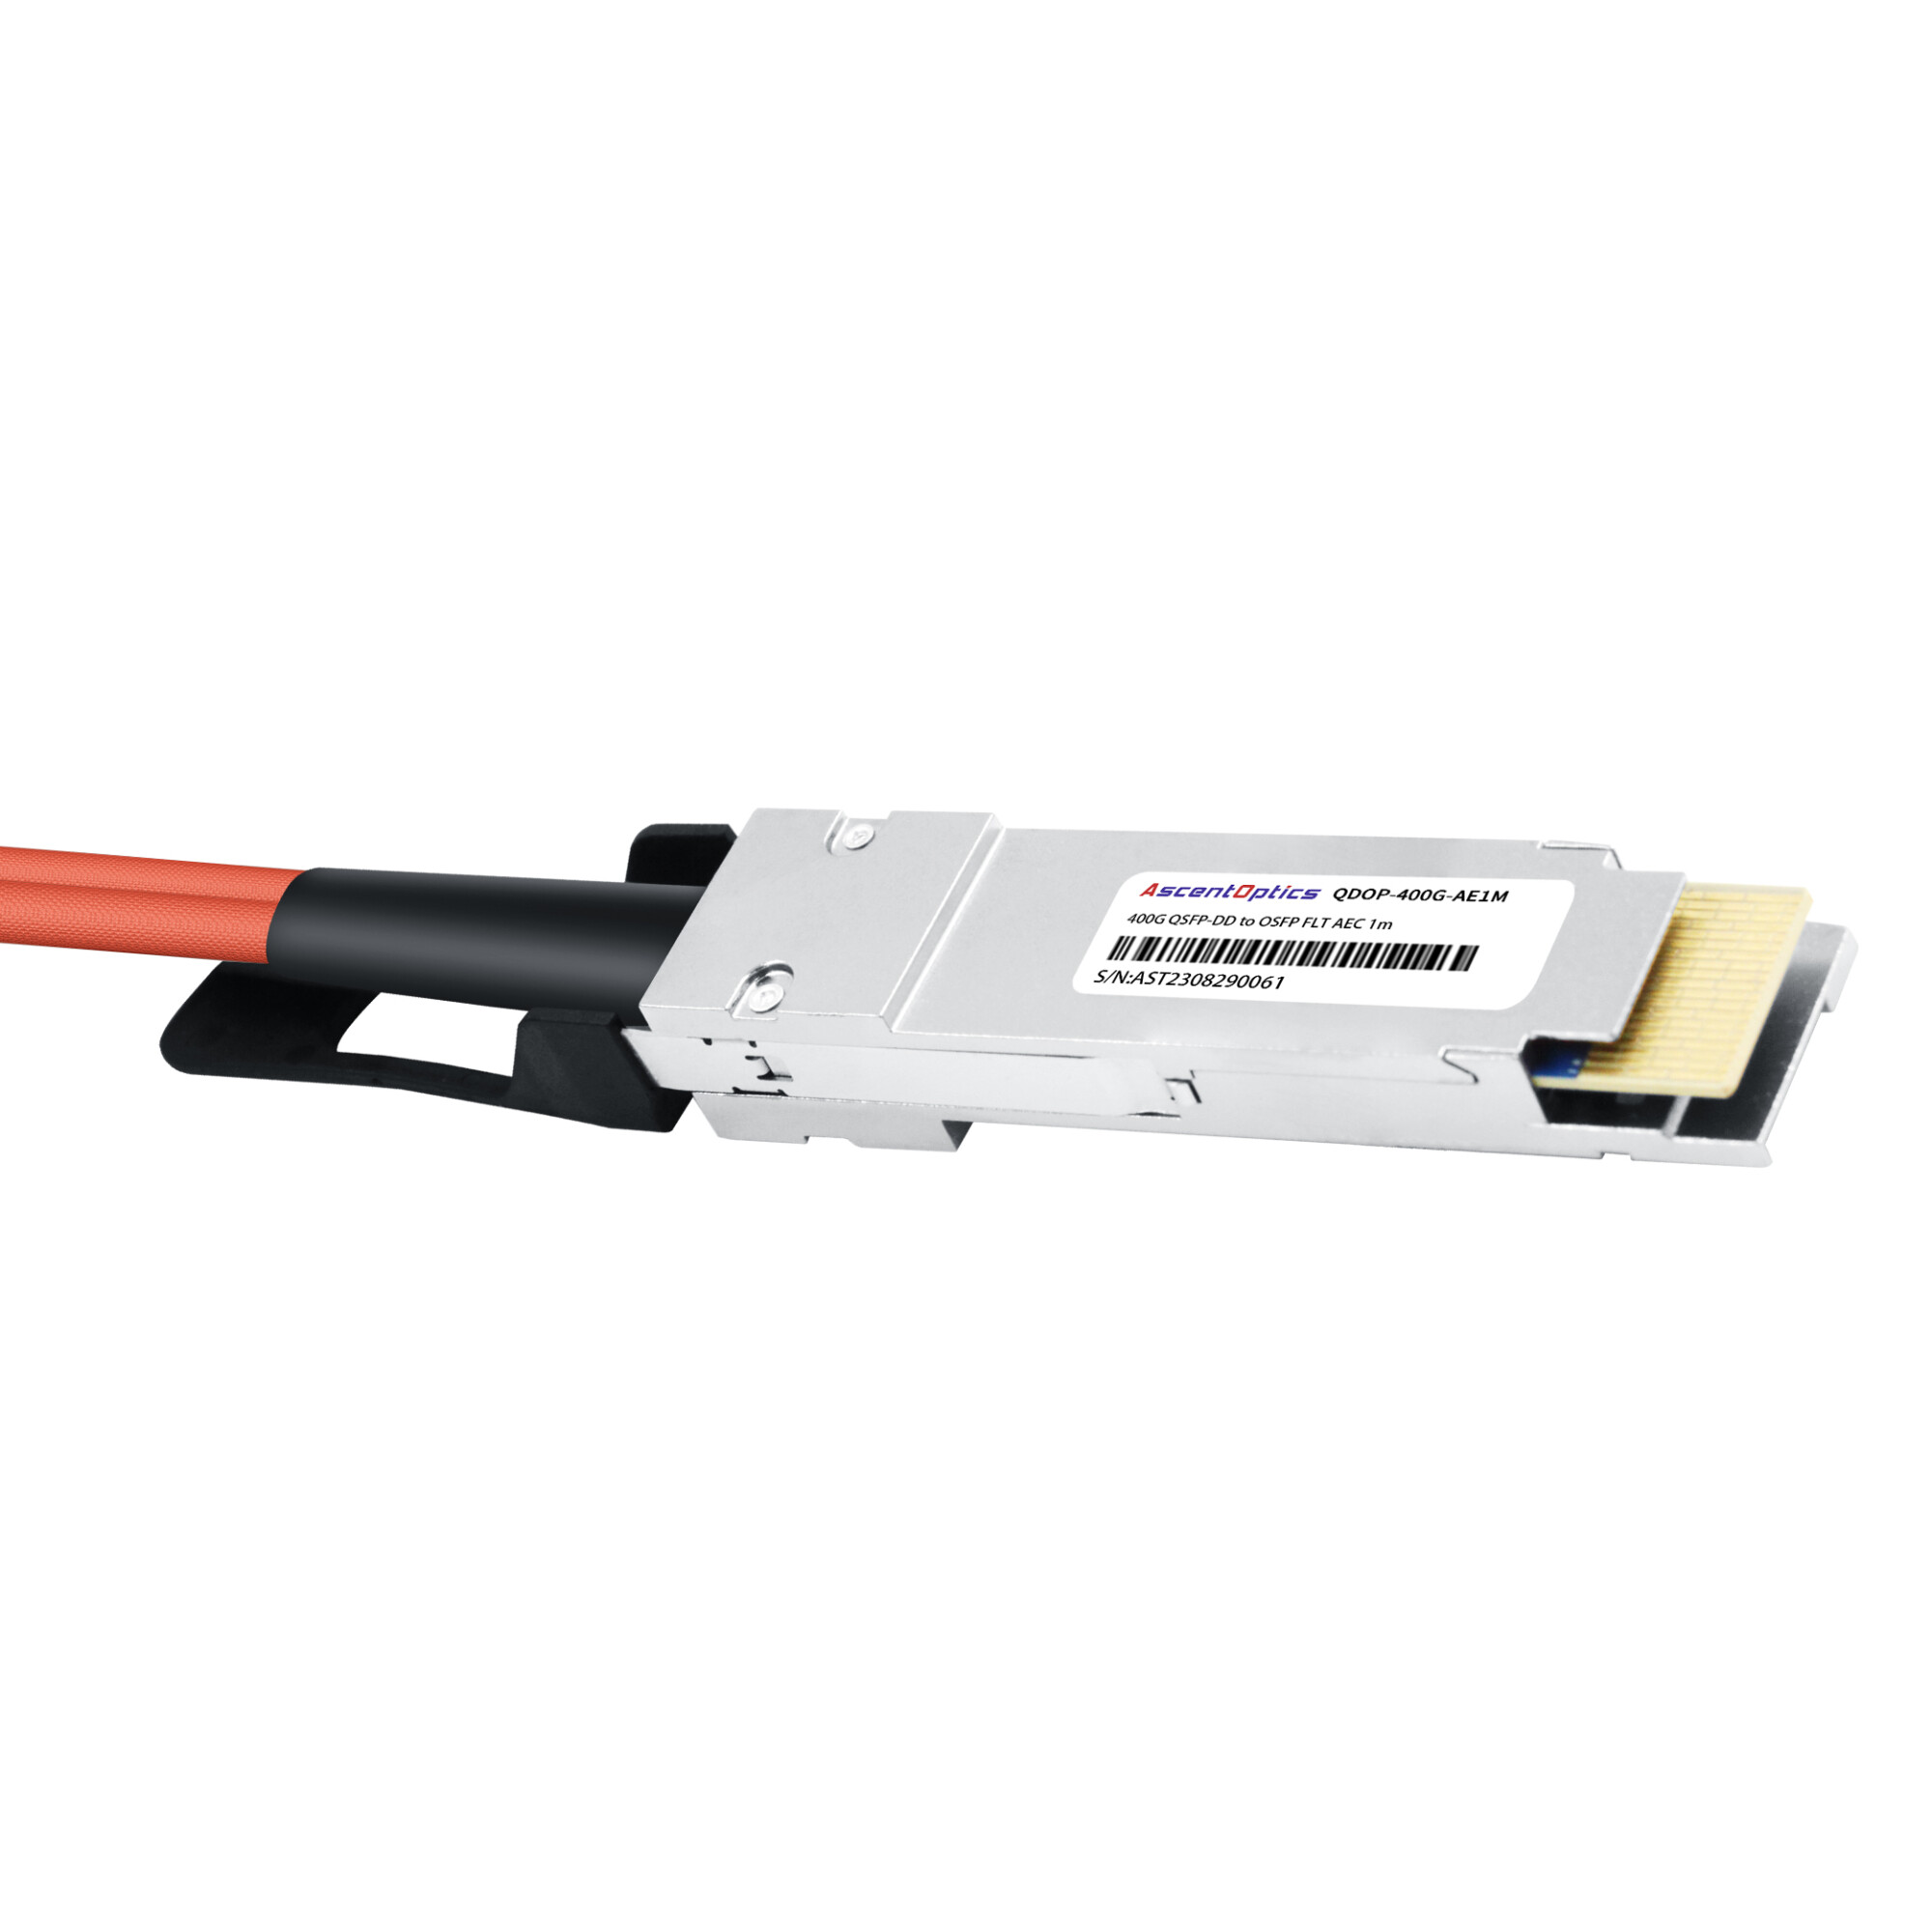 400G QSFP-DD to OSFP Flat Top AEC Cable,1 Meter,Passive